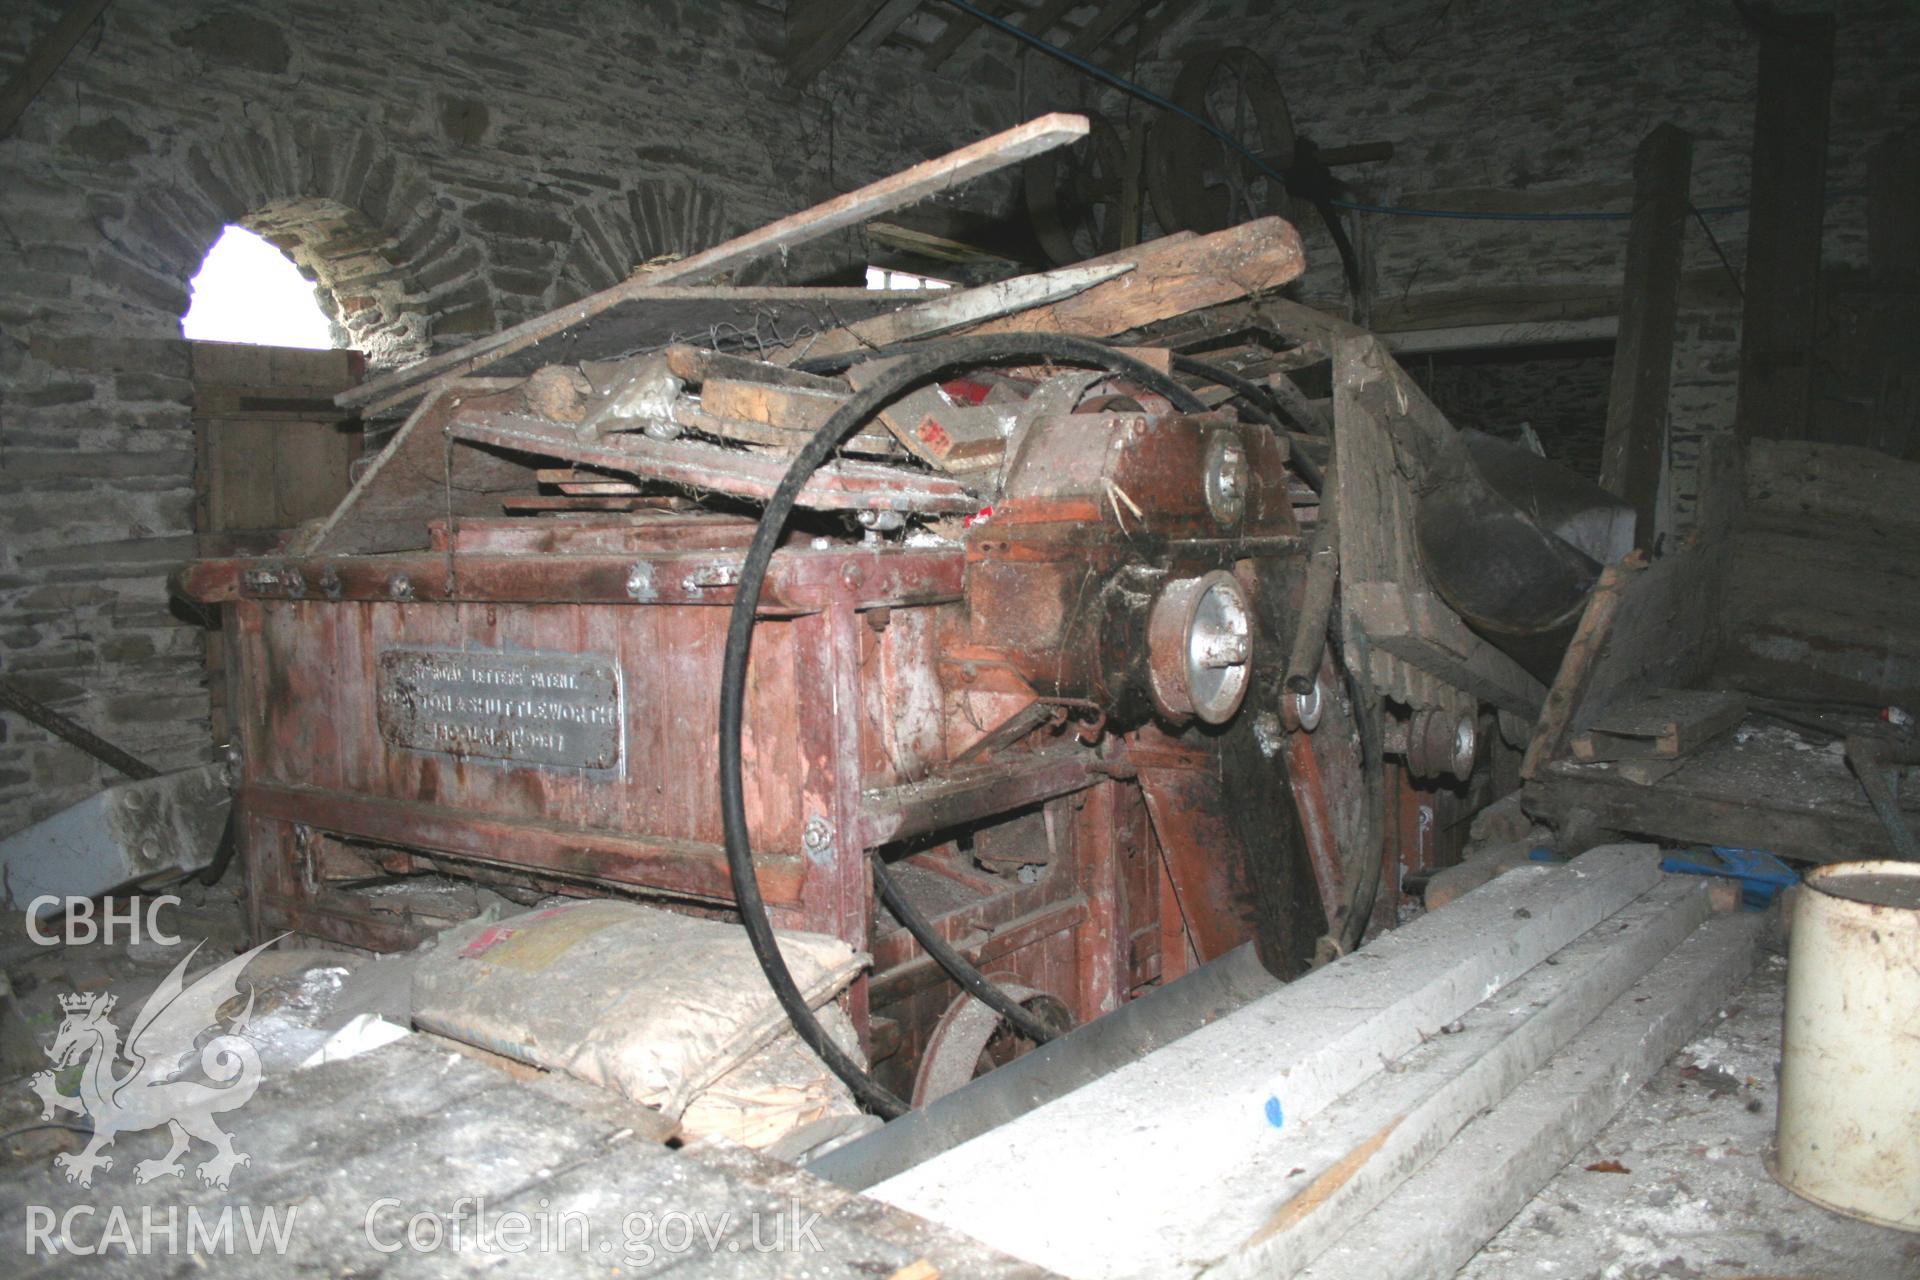 Interior view of threshing house showing threshing machine. Photographic survey of the threshing machine in the threshing house at Tan-y-Graig Farm, Llanfarian. Conducted by Geoff Ward and John Wiles 11th December 2016.